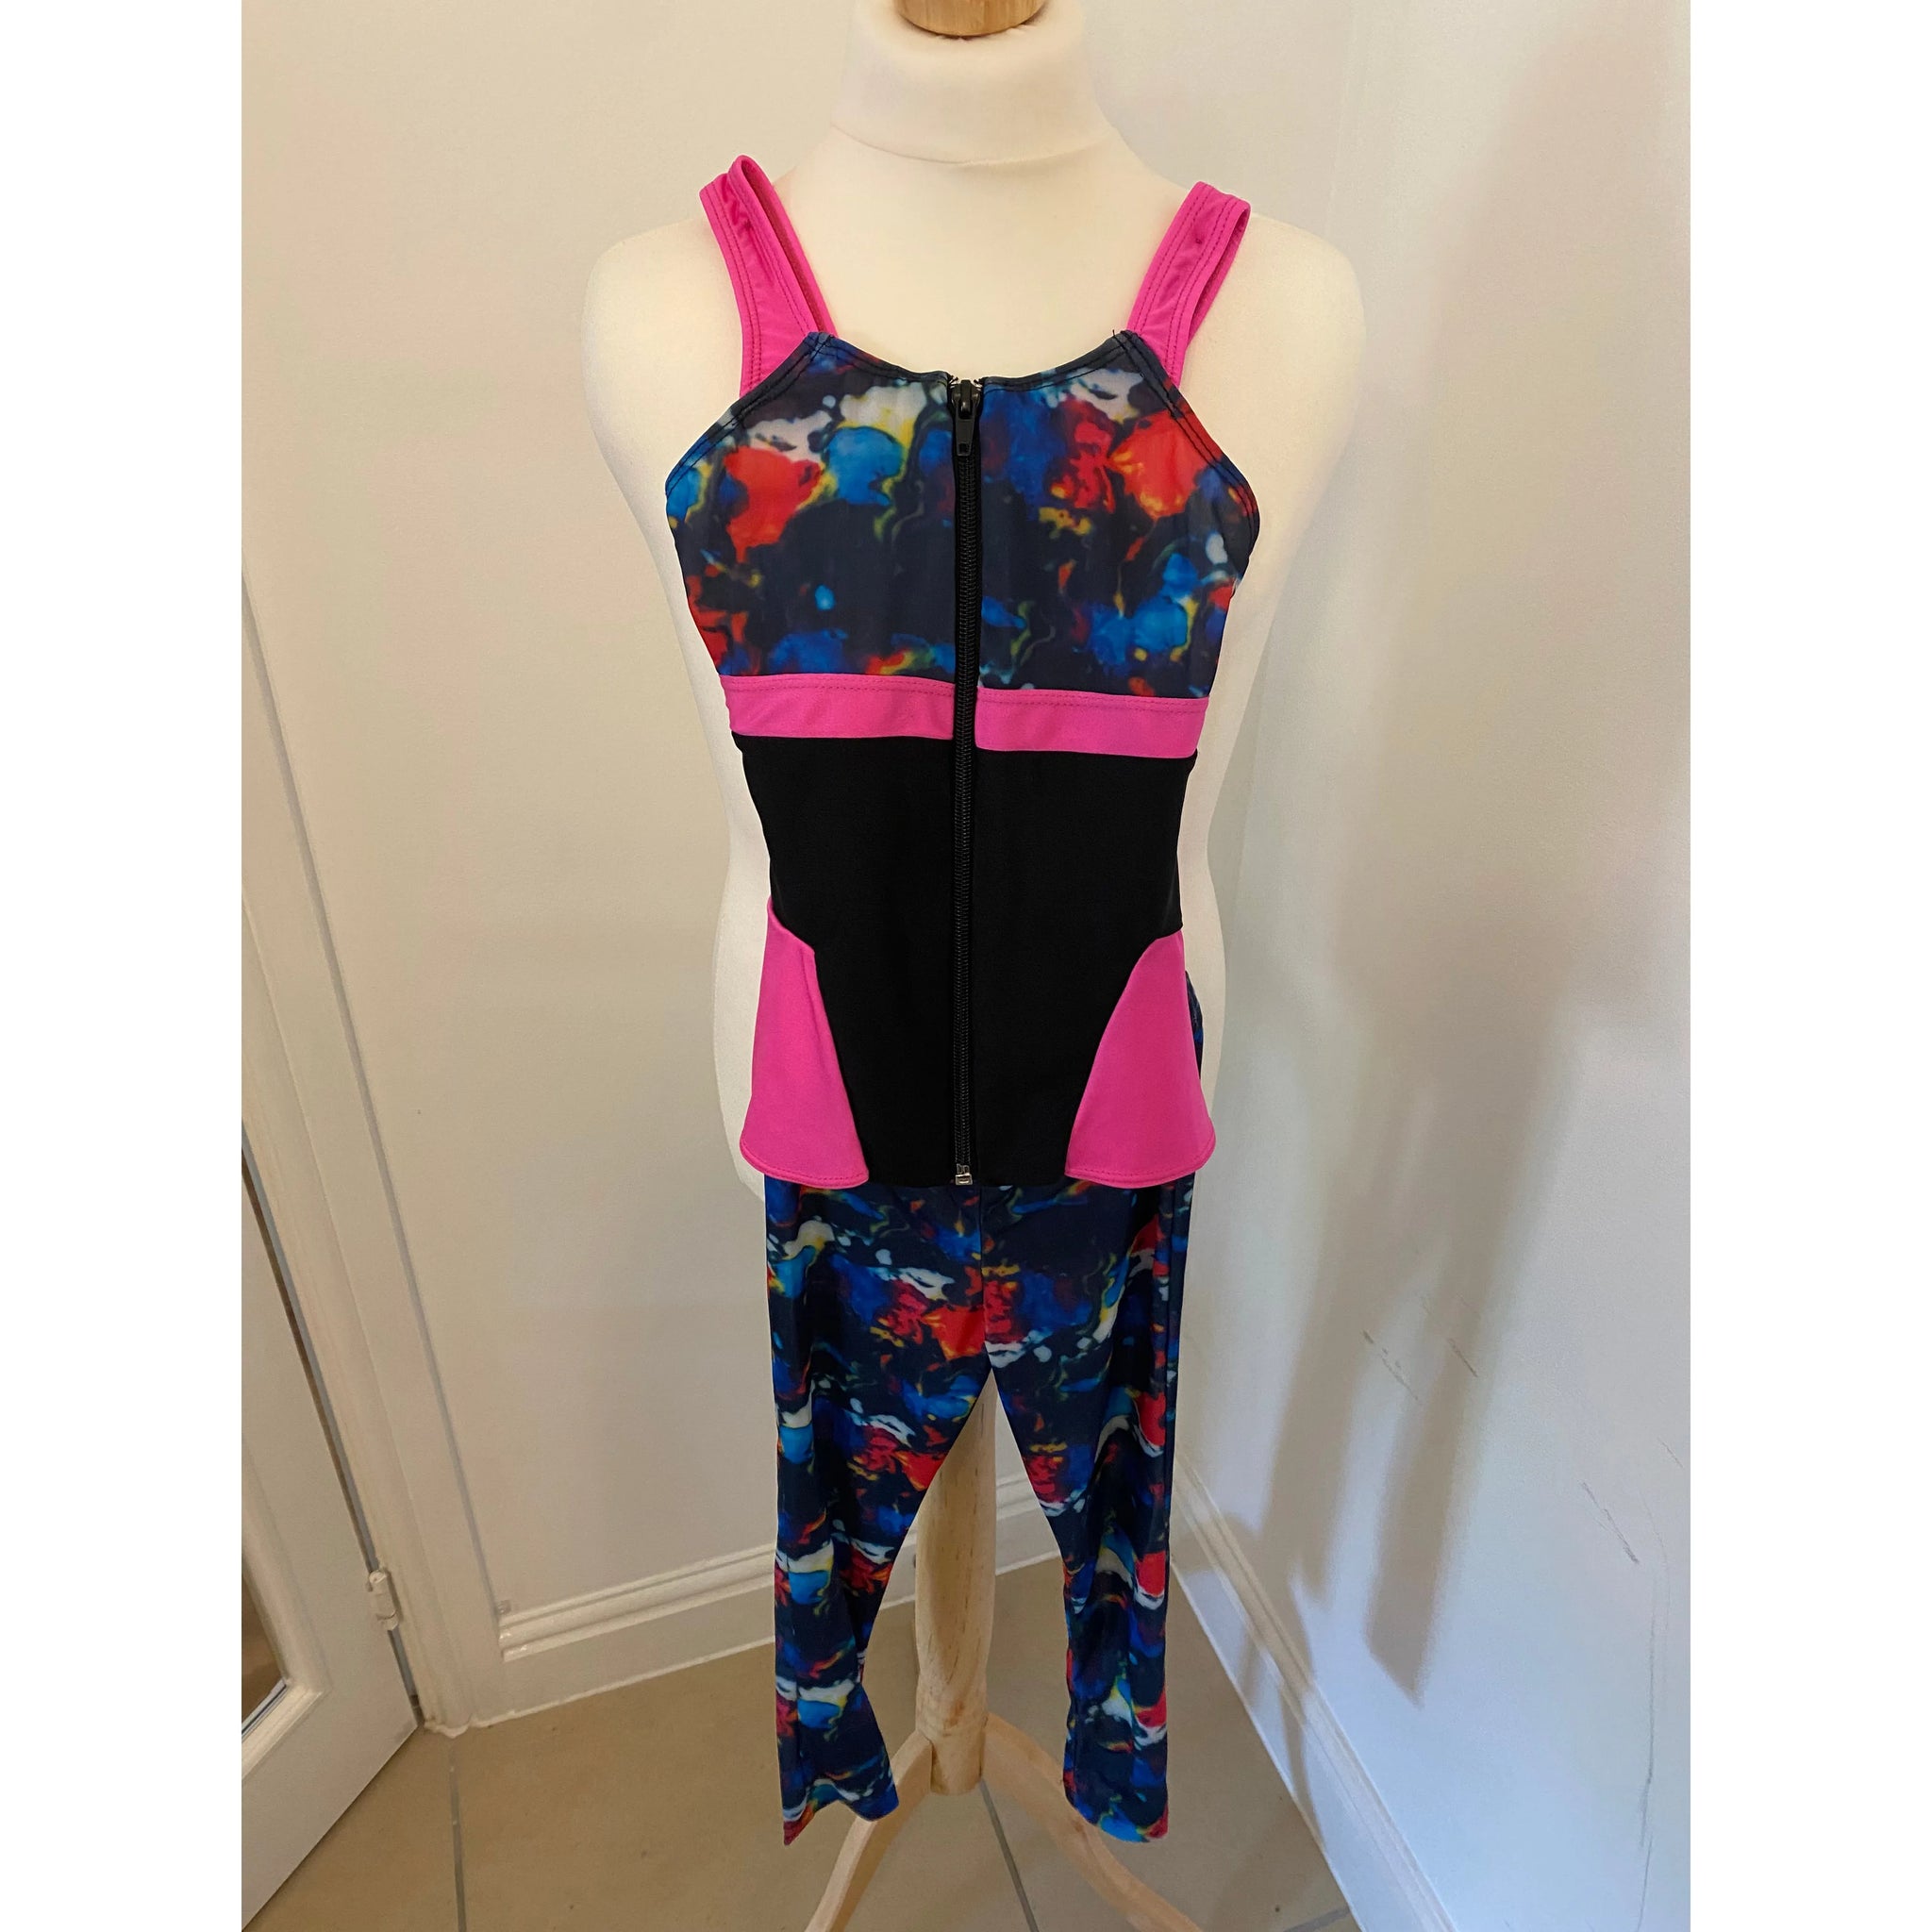 PRE-LOVED Revolution Two Piece Dance Costume - size SC (approx age 5-6)